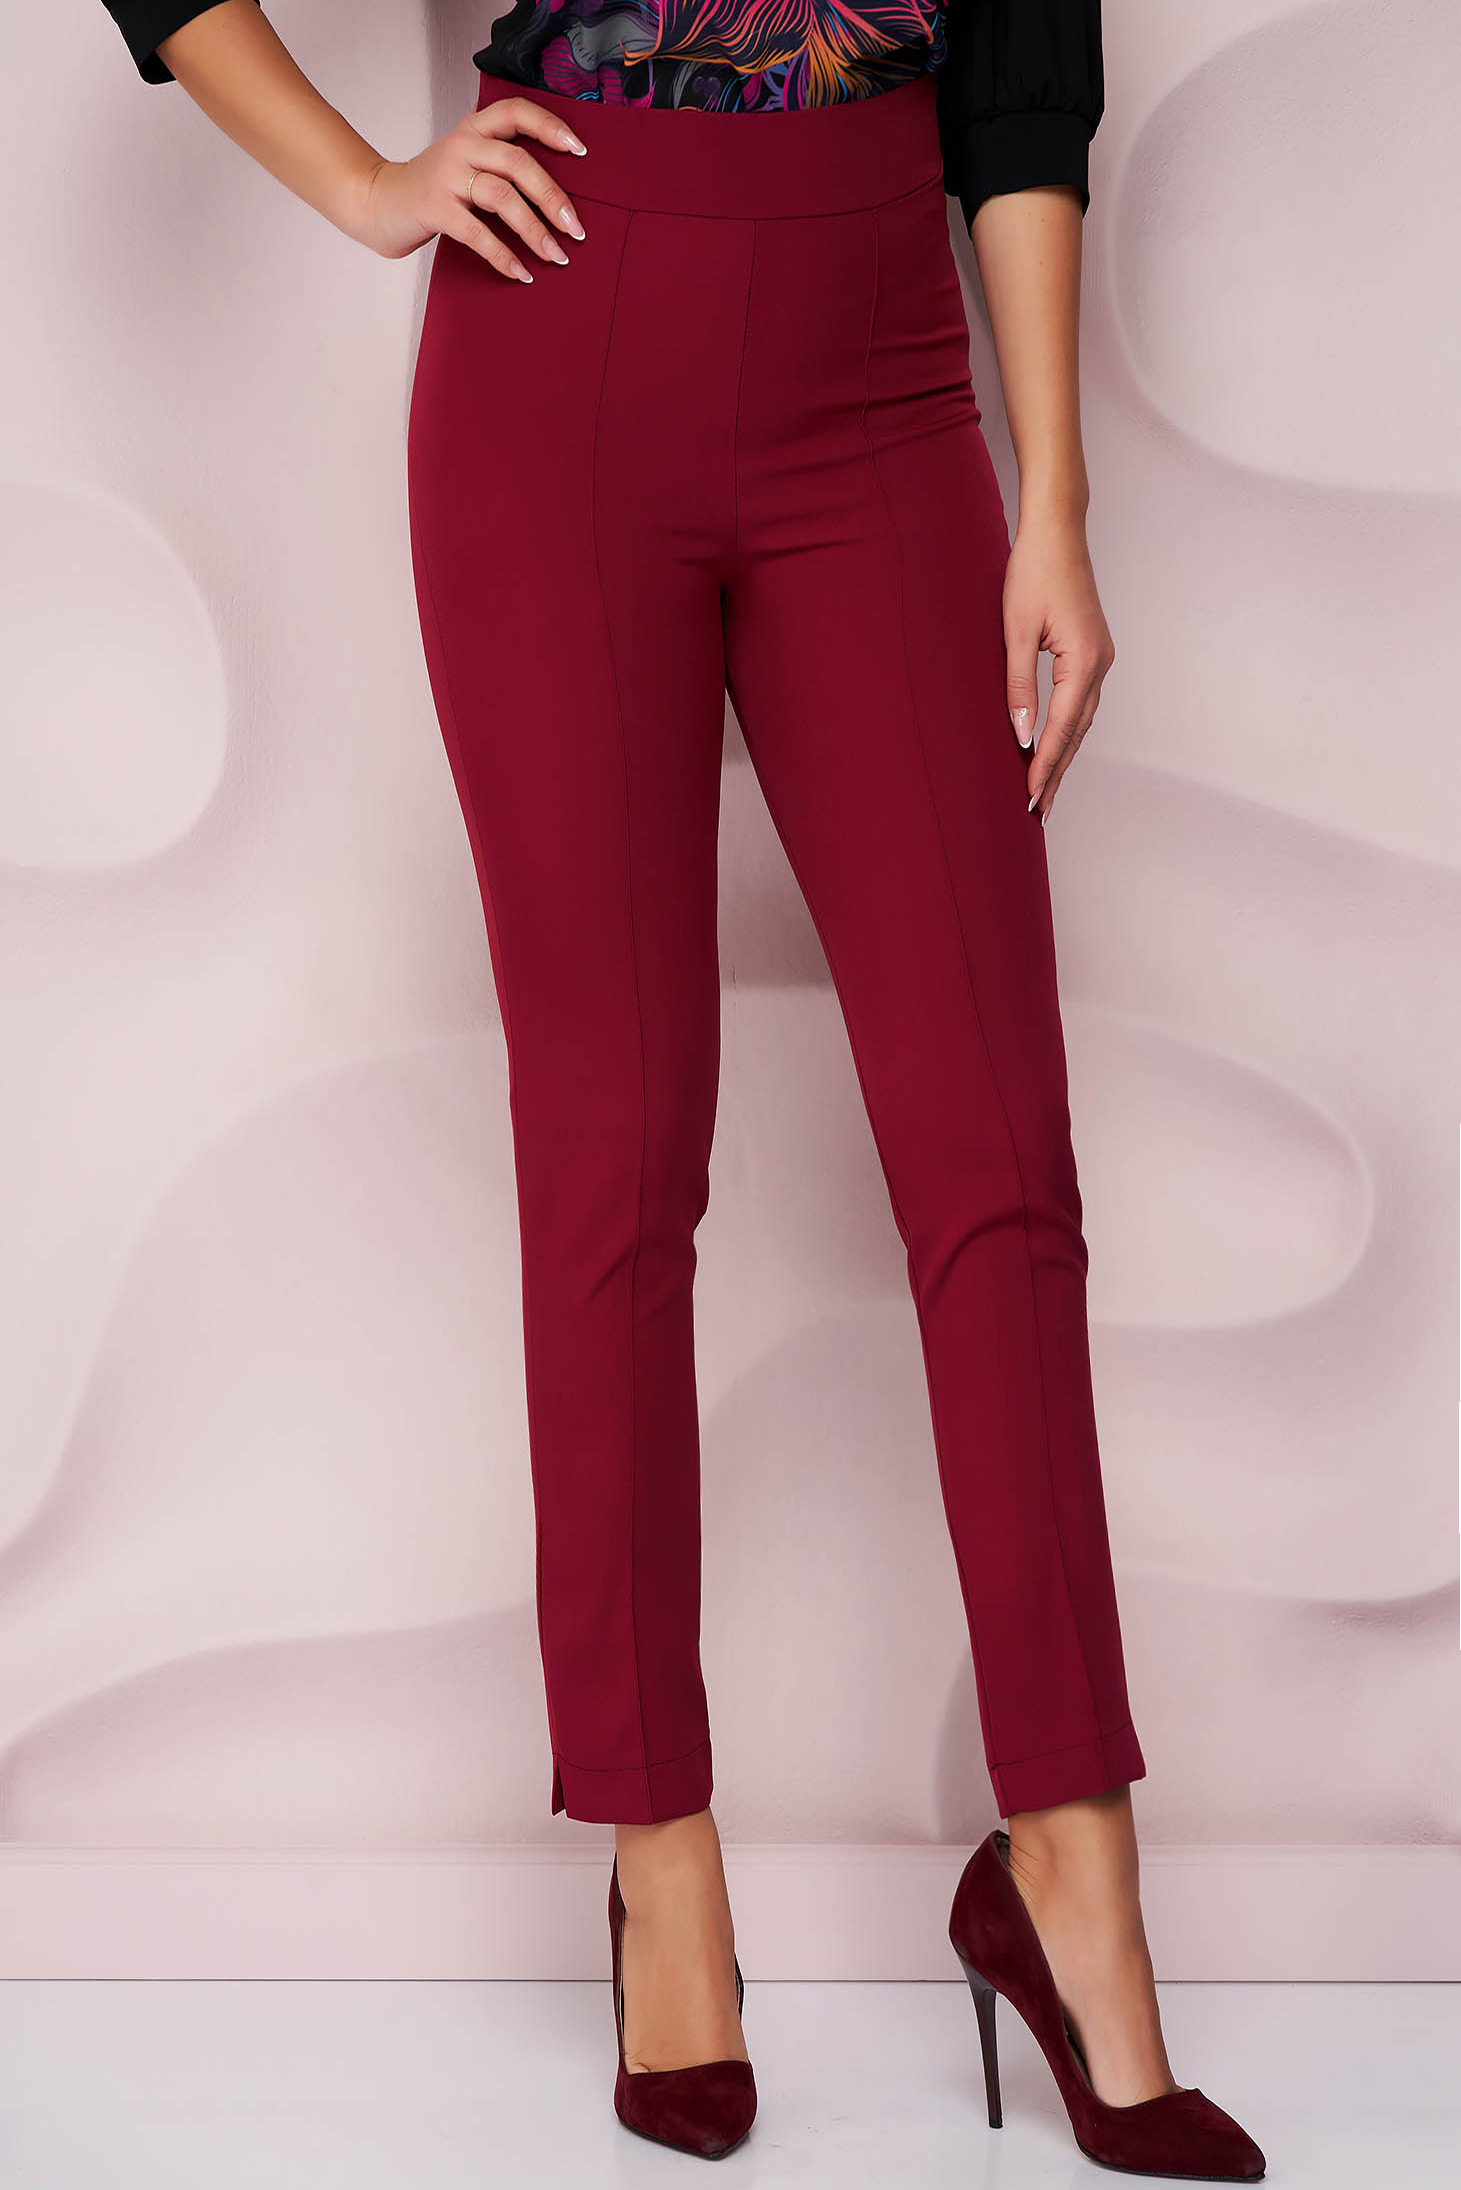 Raspberry trousers conical high waisted cloth